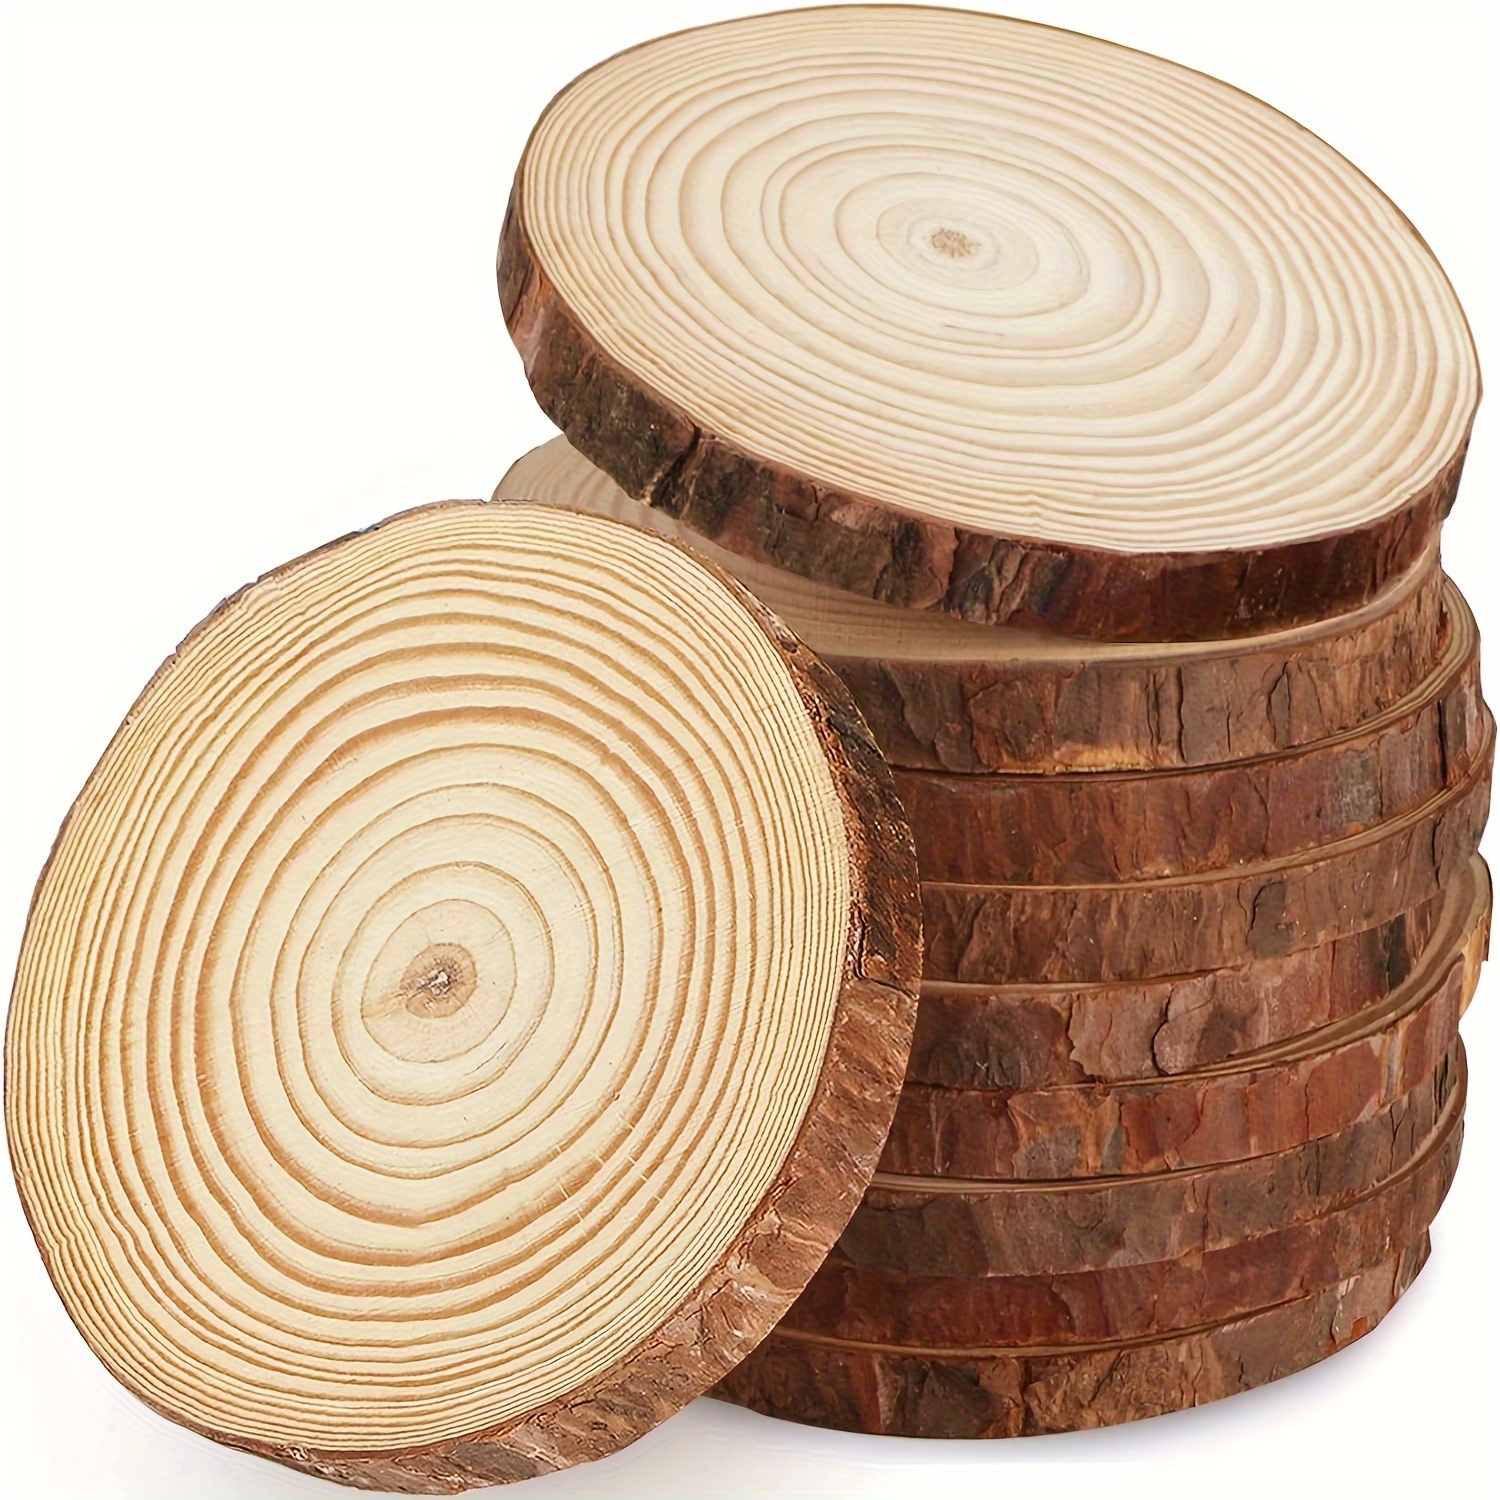 20pcs 10MM Blanks Round Wood Slices Unfinished Wooden Circles for